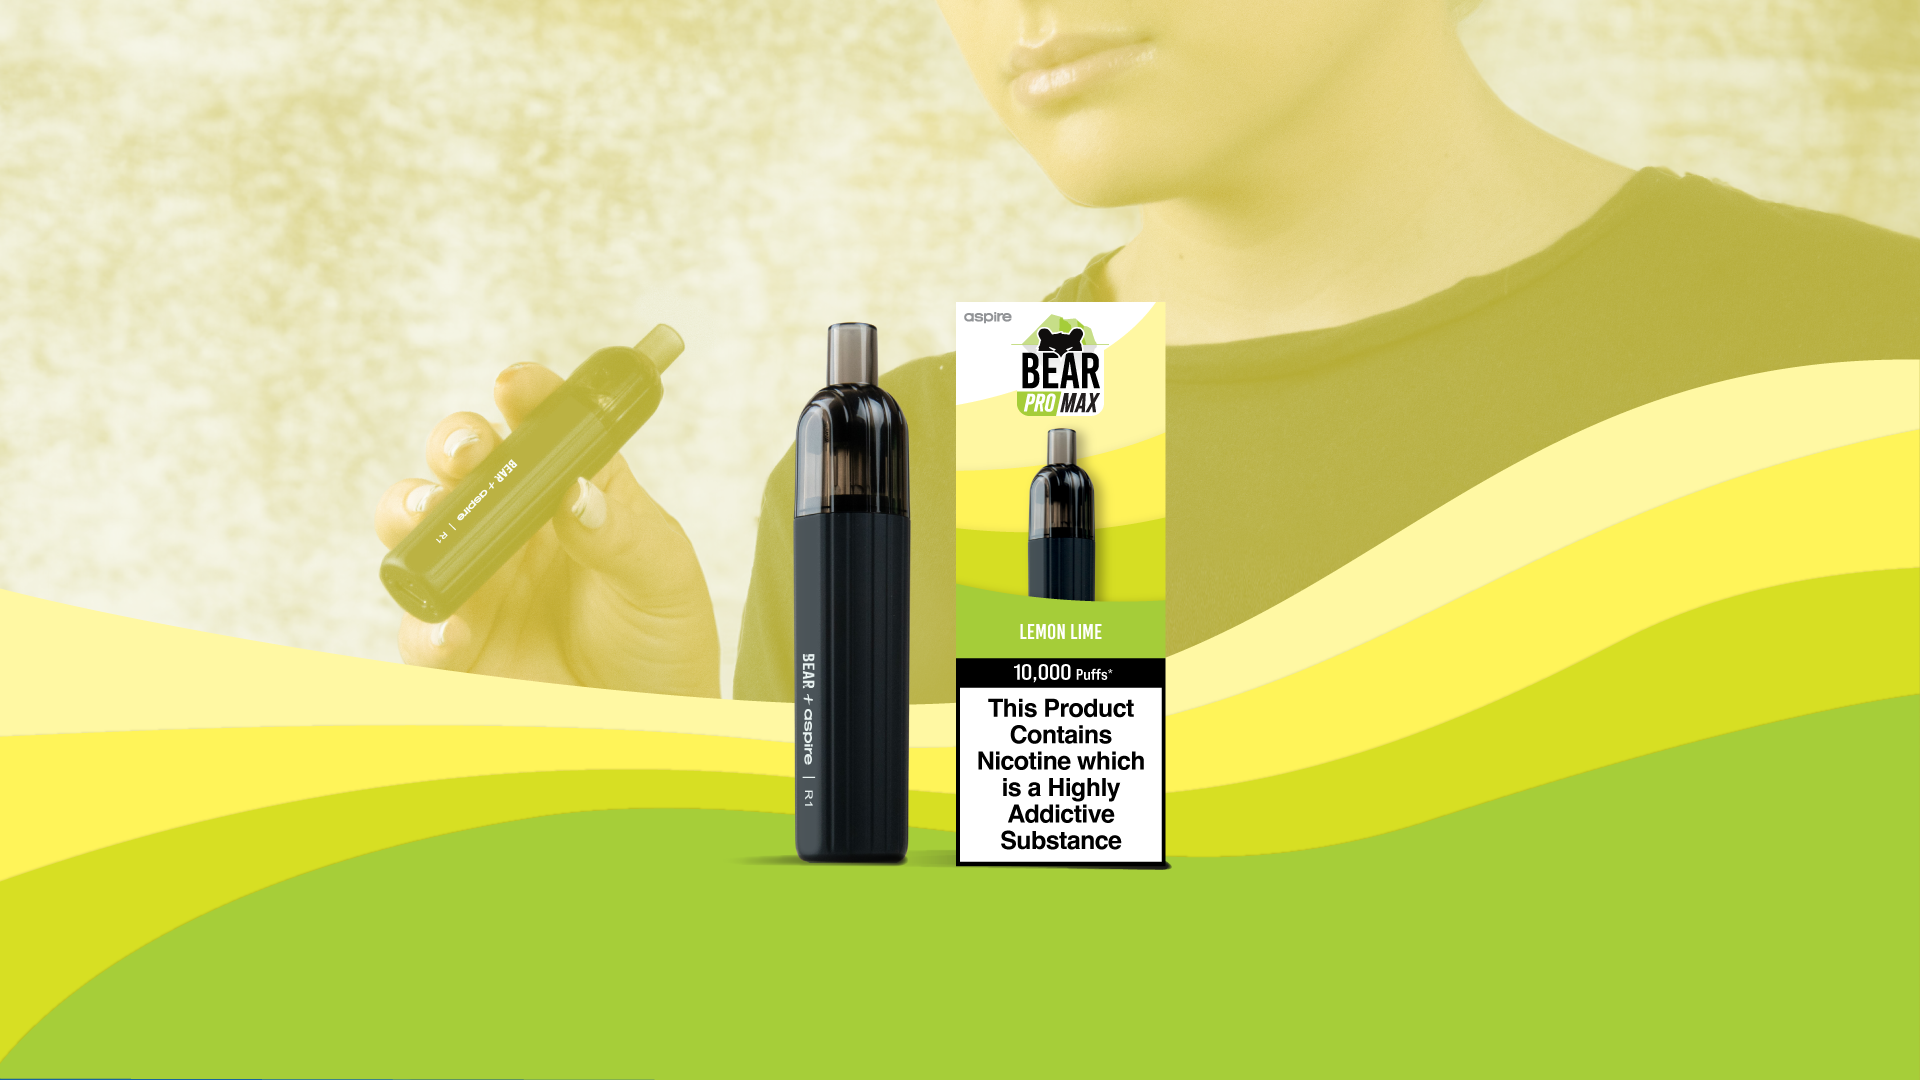 The BEAR Pro MAX is a 10,000 puff disposable vape that is refillable and rechargeable. Perfect for daily vaping.